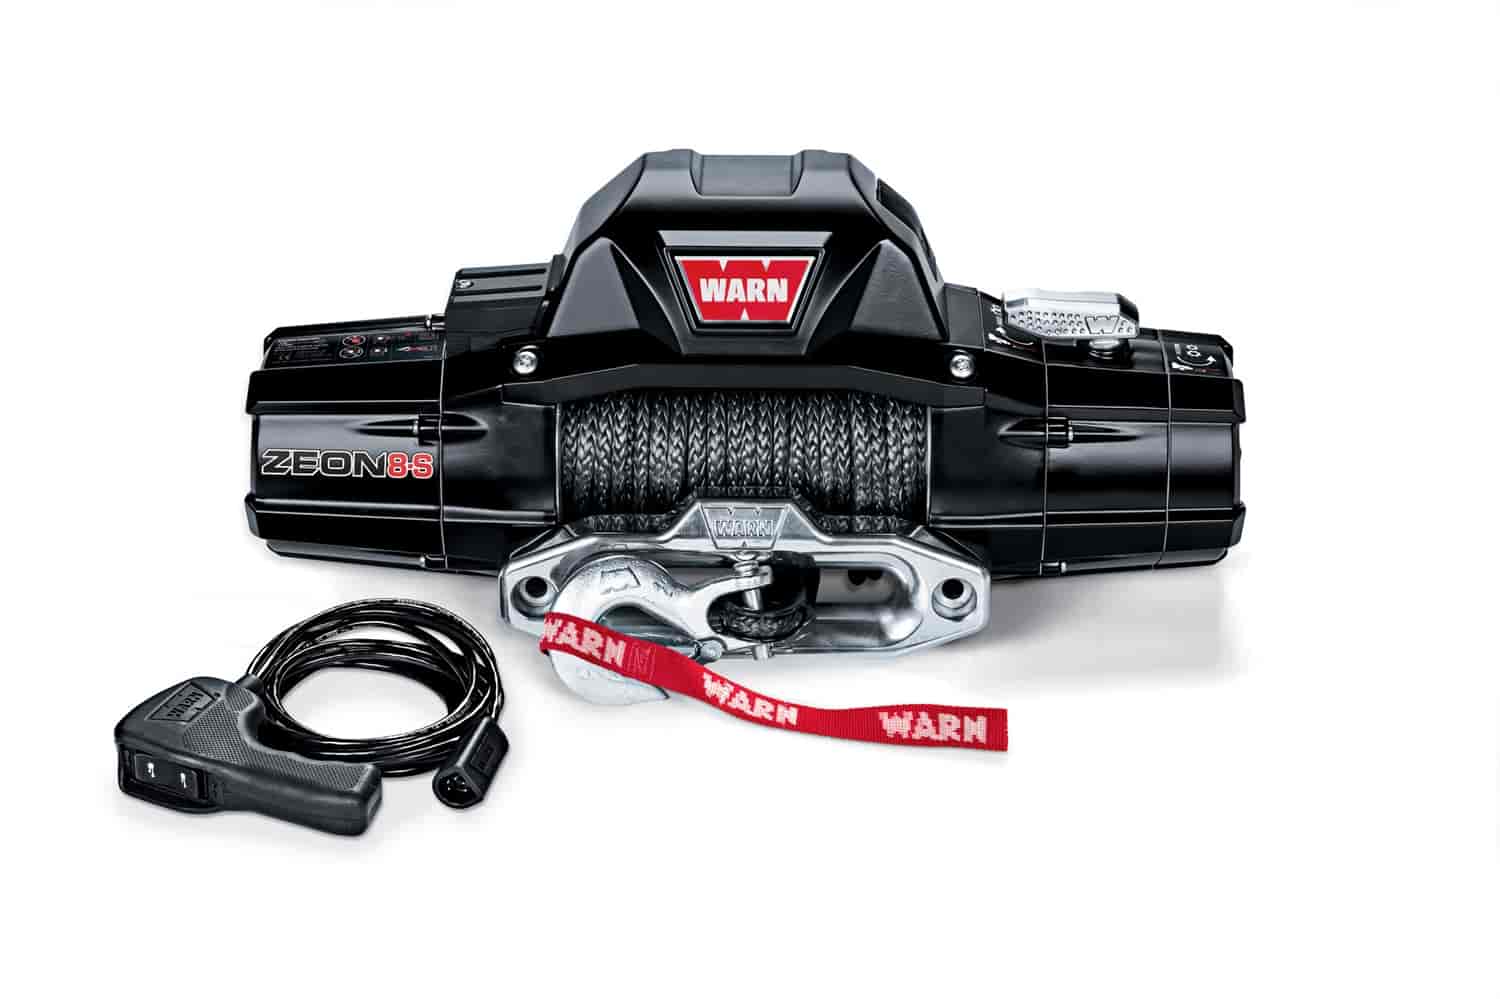 ZEON 8-S Winch with 100 Ft. Spydura Synthetic Rope and Hawse Fairlead